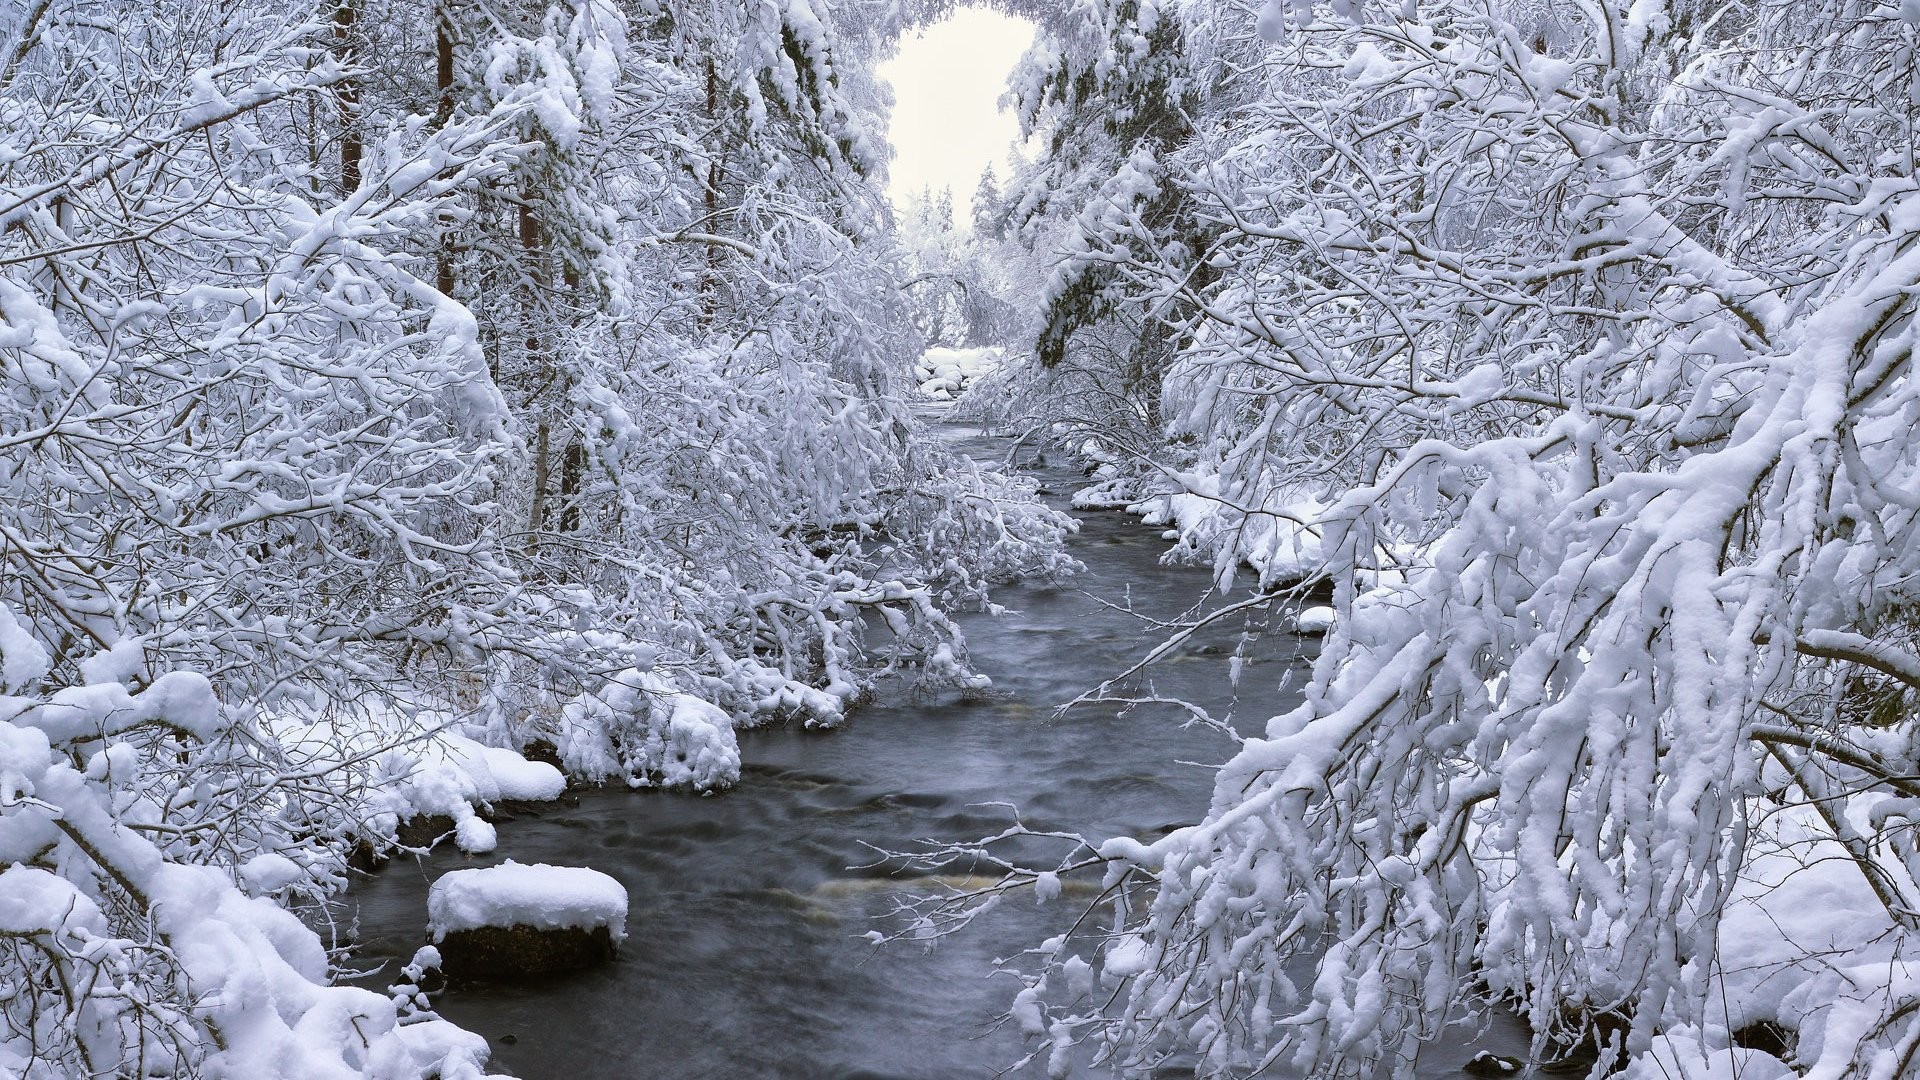 General 1920x1080 winter creeks forest snow nature cold outdoors trees